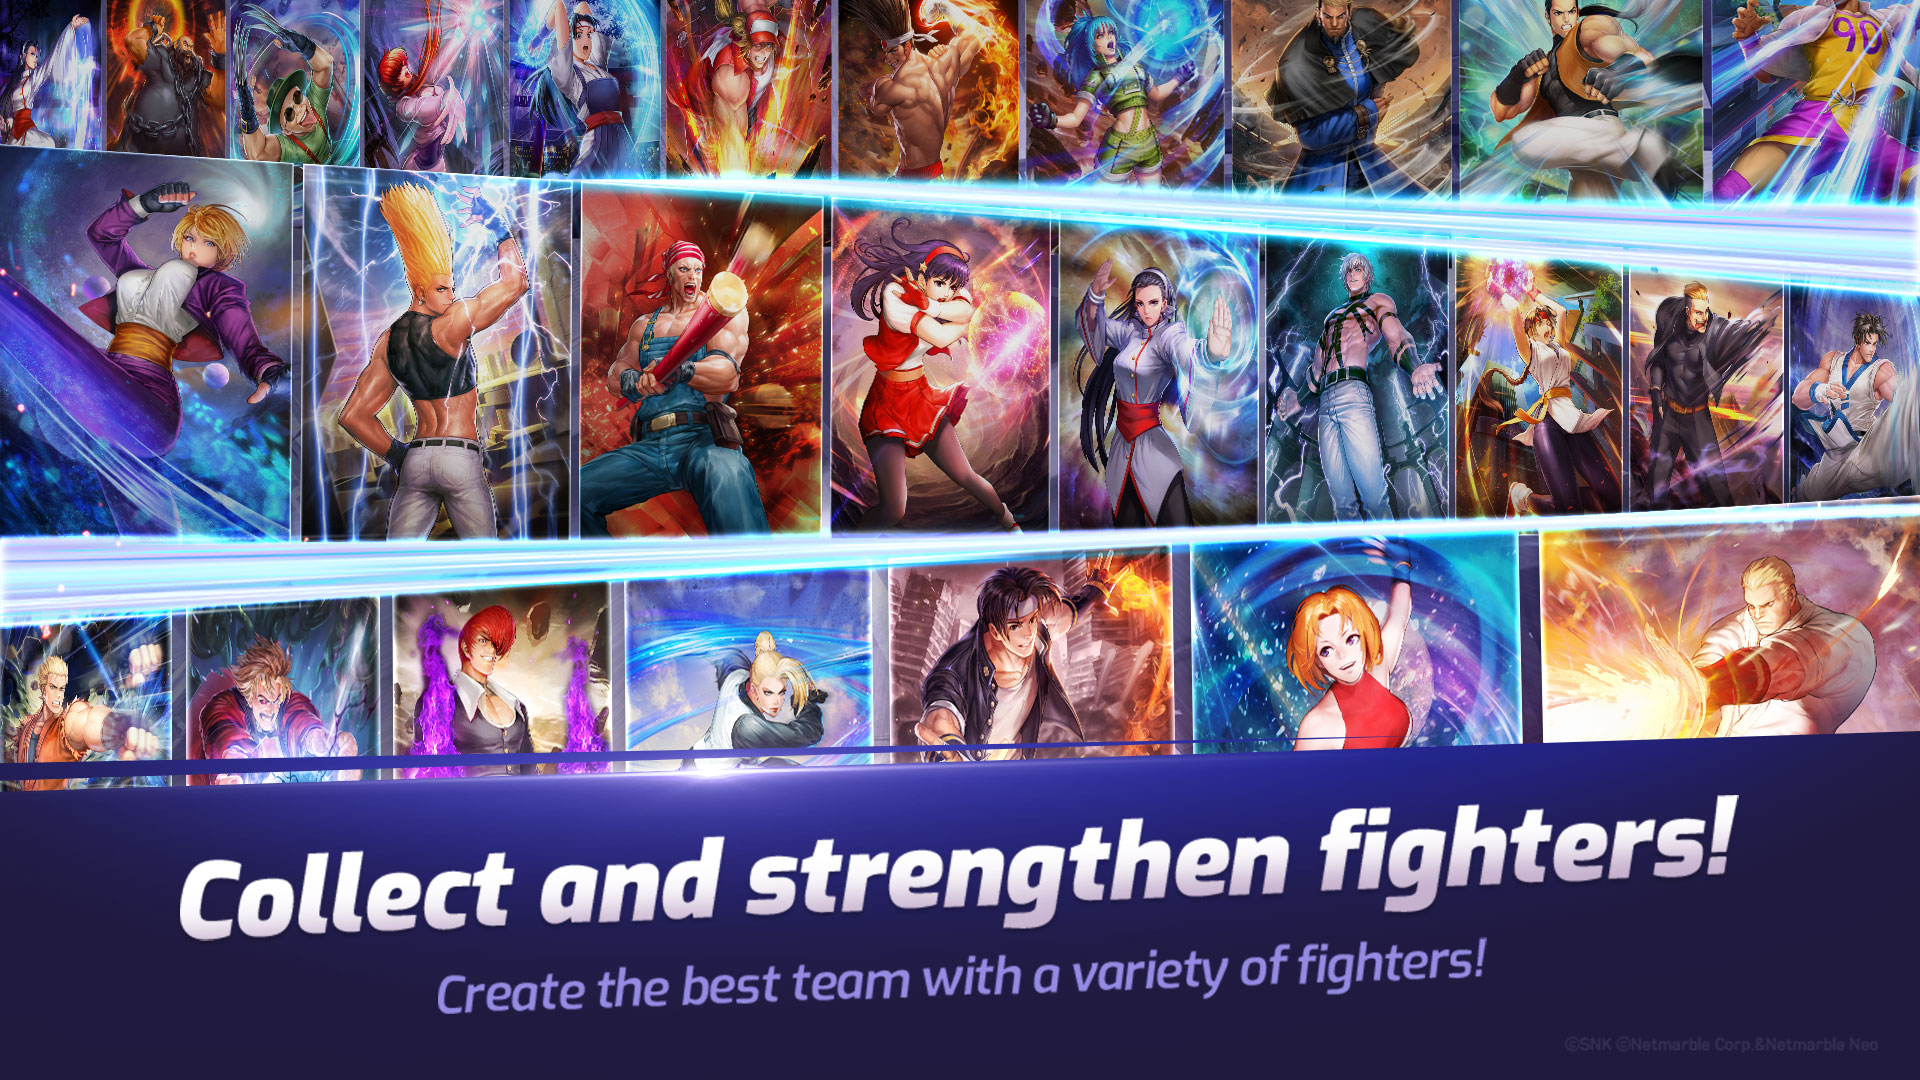 The King of Fighters ALLSTAR 1.1.0 APK Download by Netmarble - APKMirror